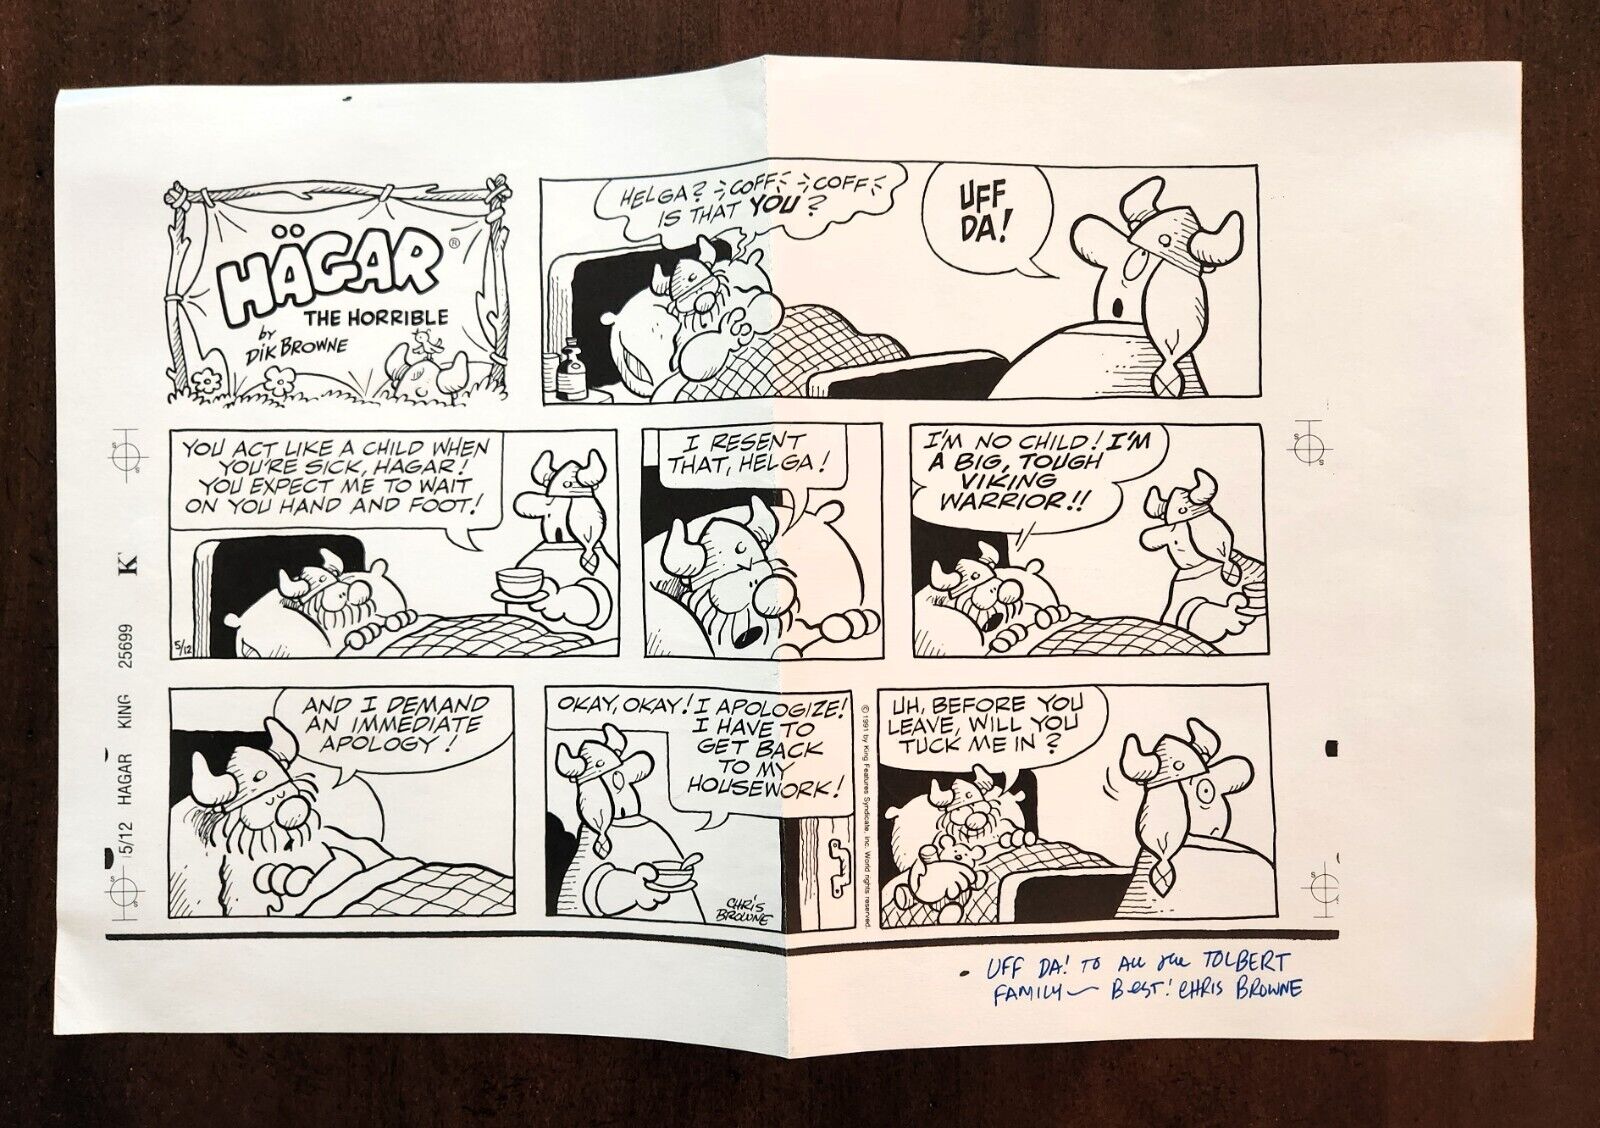 HAGAR THE HORRIBLE, CHRIS BROWNE SIGNED LITHOGRAPH,  Sunday strip, May 12, 1991